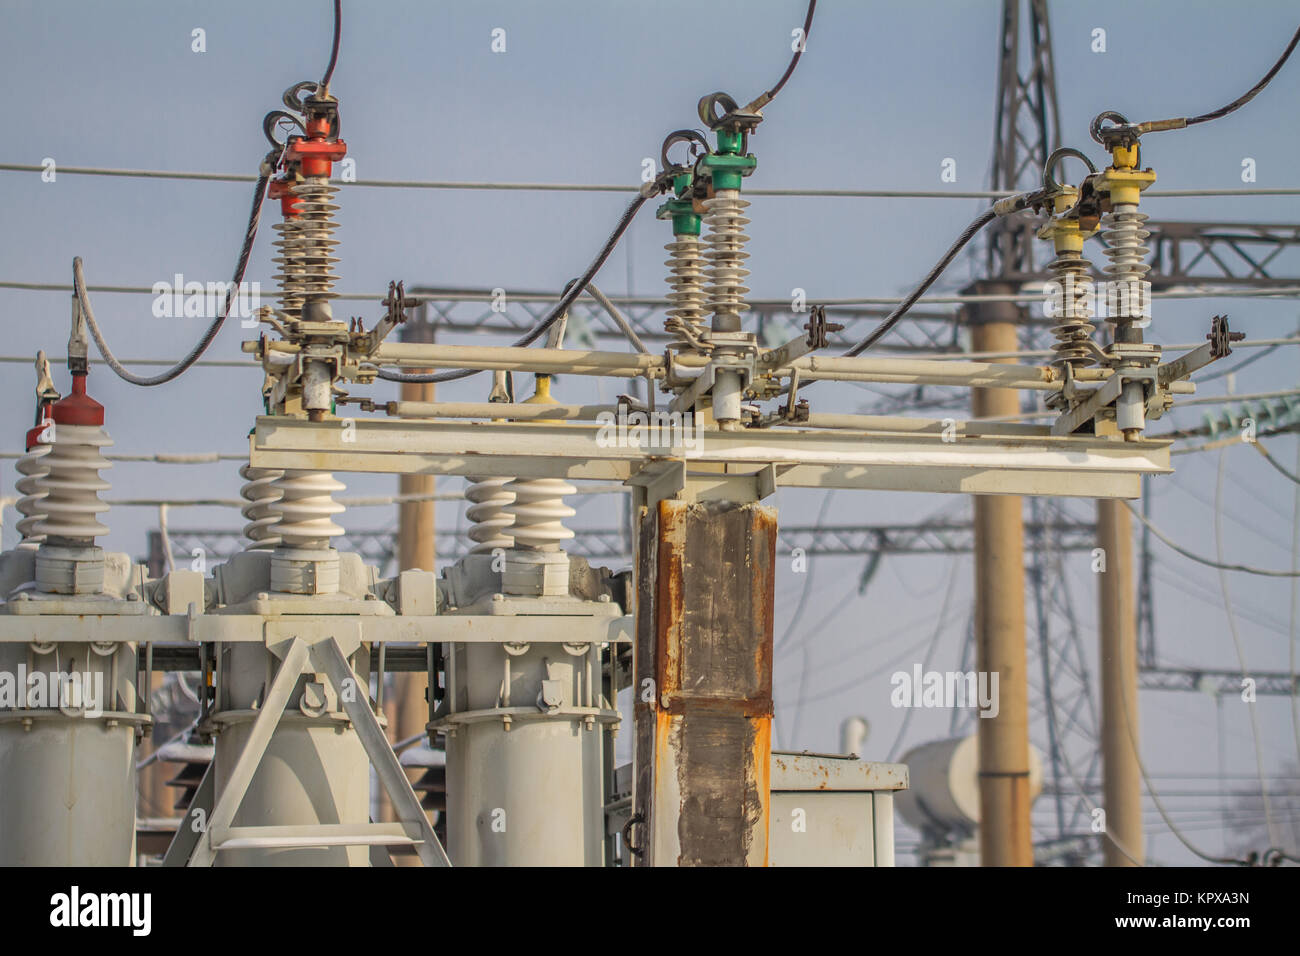 electrical equipment for high voltage substations, insulators Stock Photo